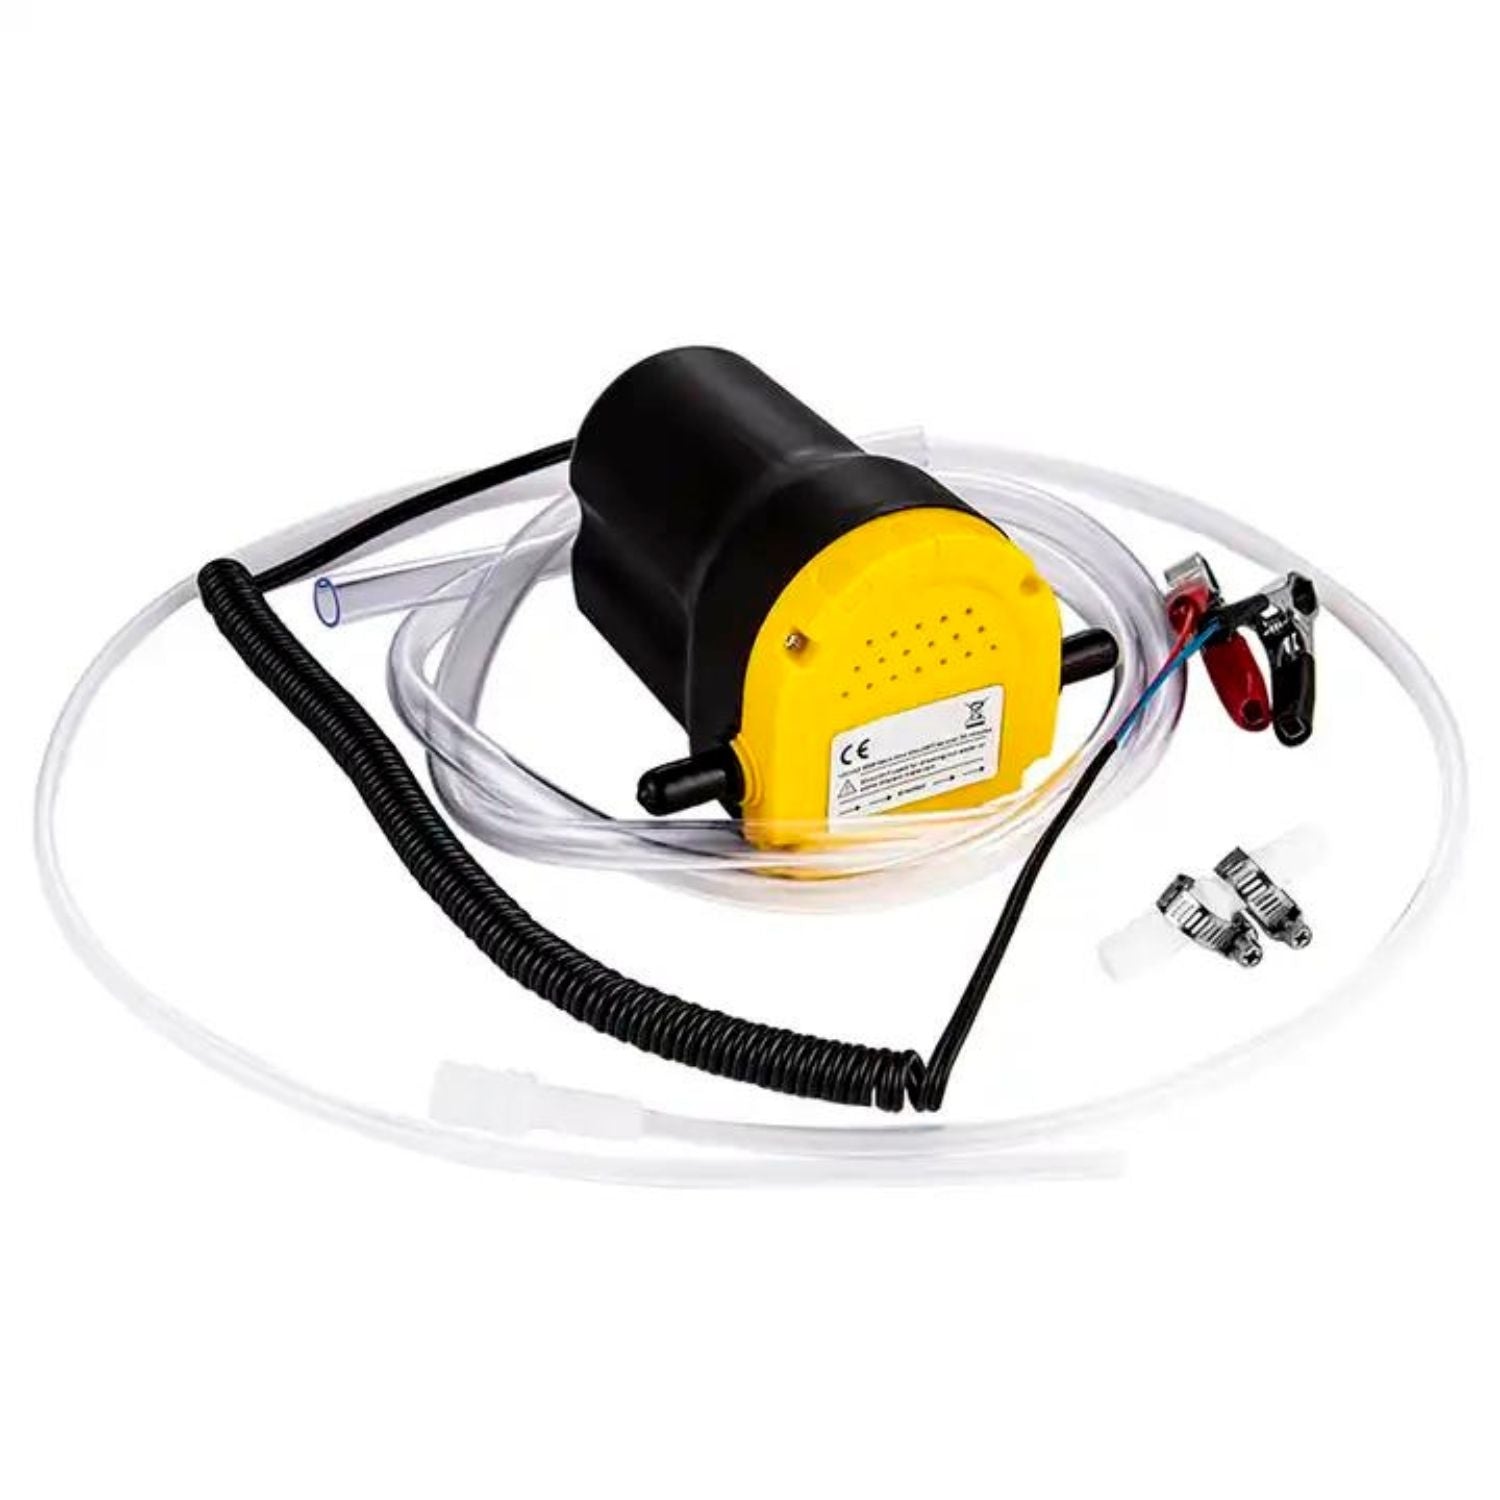 RYNOMATE 12V Portable Small Transfer Pump for Gear Oil, Lubricant, and Edible Oil Transfer (2-3L/min)